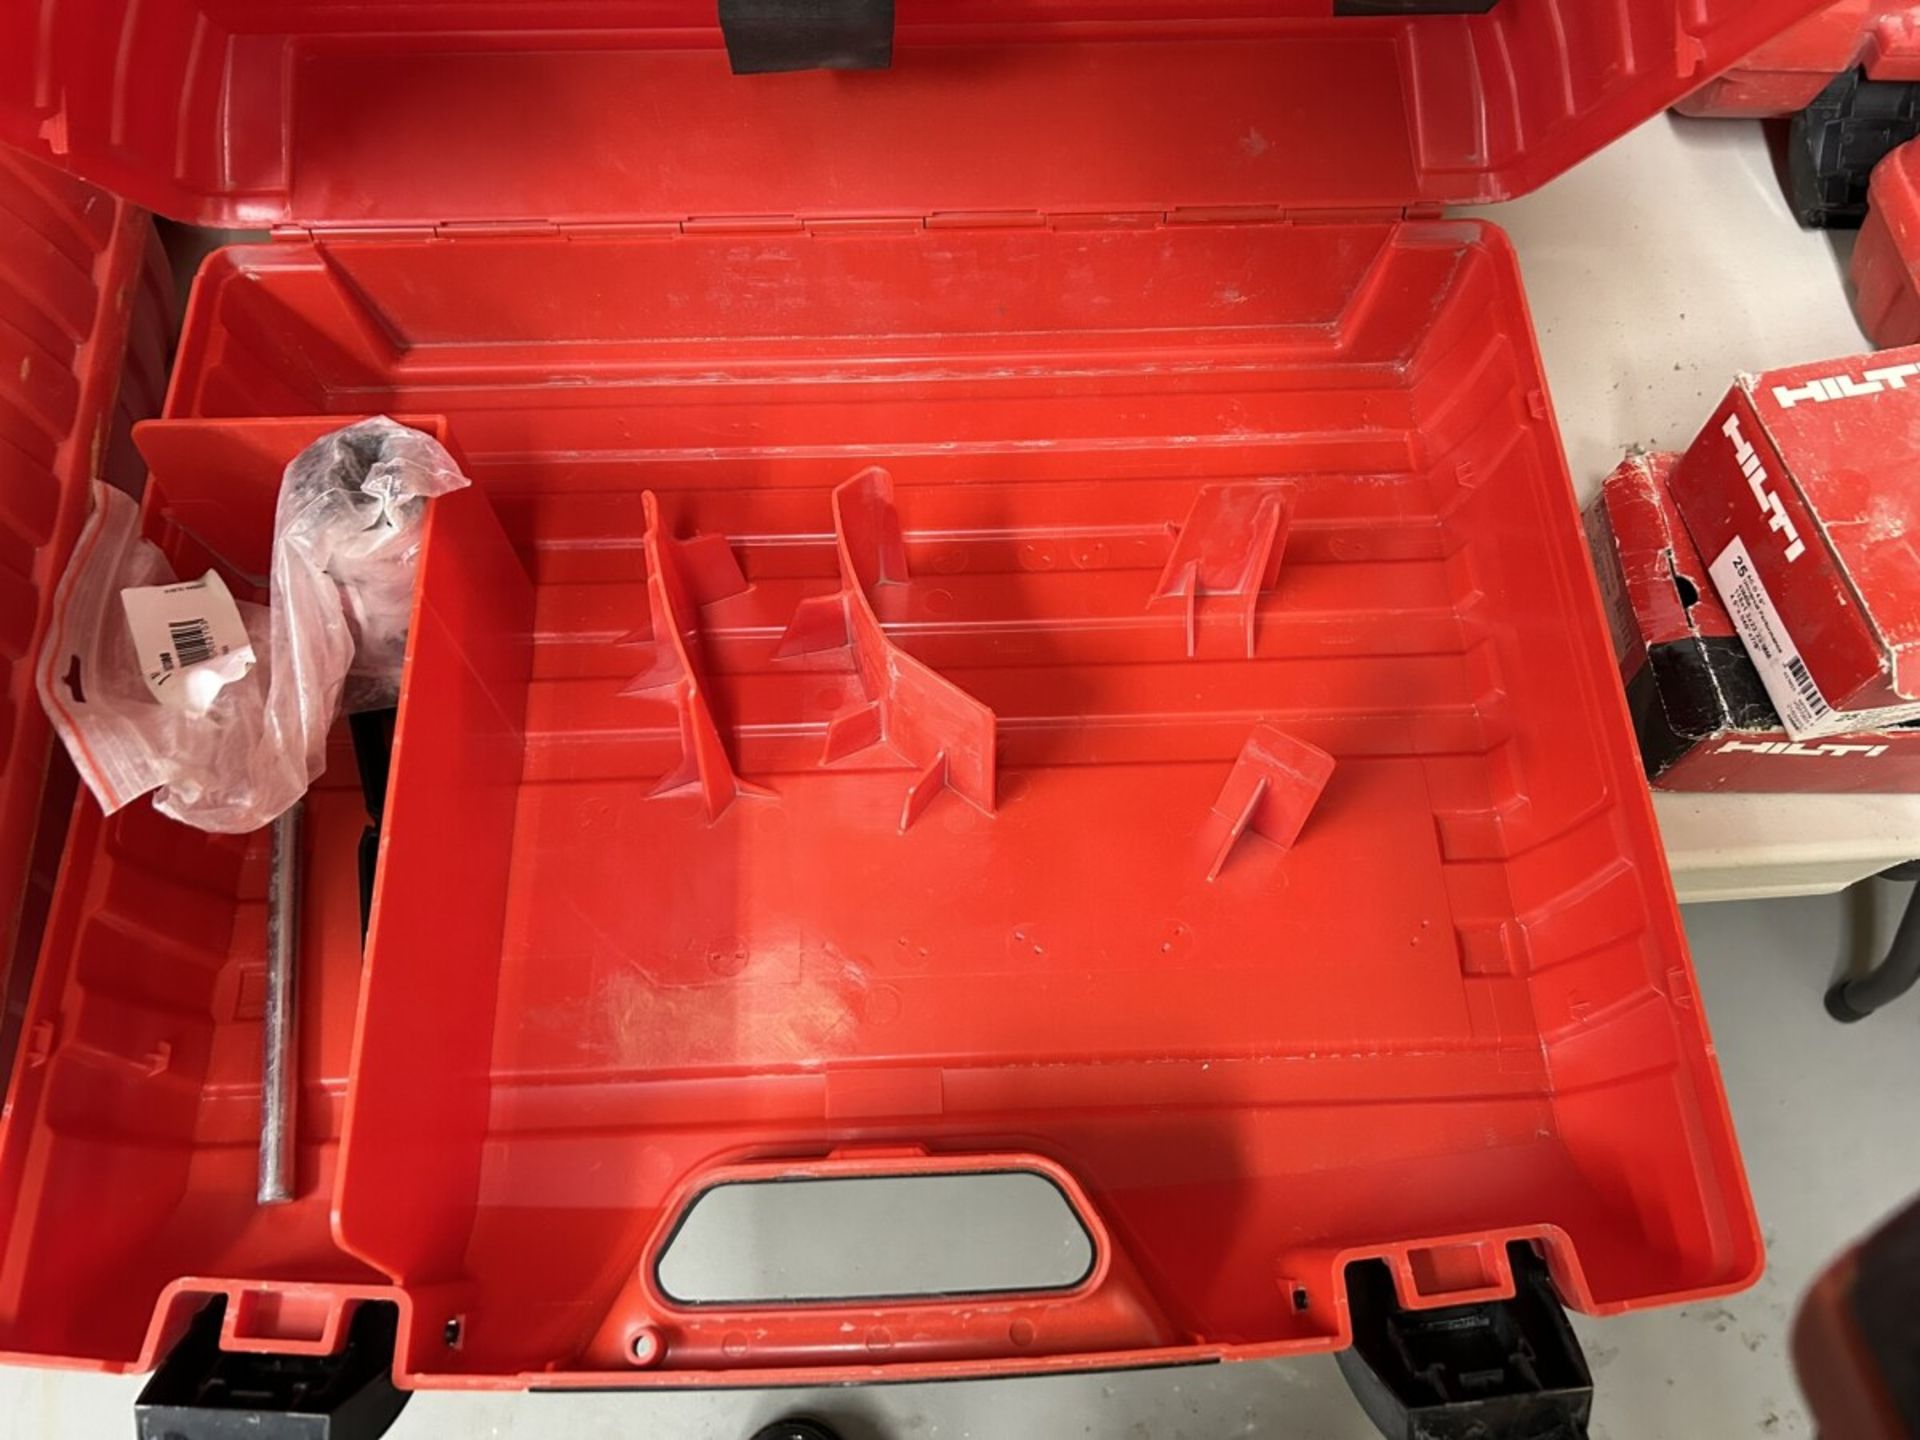 HILTI GX 3 GAS-ACTUATED FASTENING TOOL GAS NAILER WITH SINGLE POWER SOURCE FOR DRYWALL TRACK, - Image 6 of 7